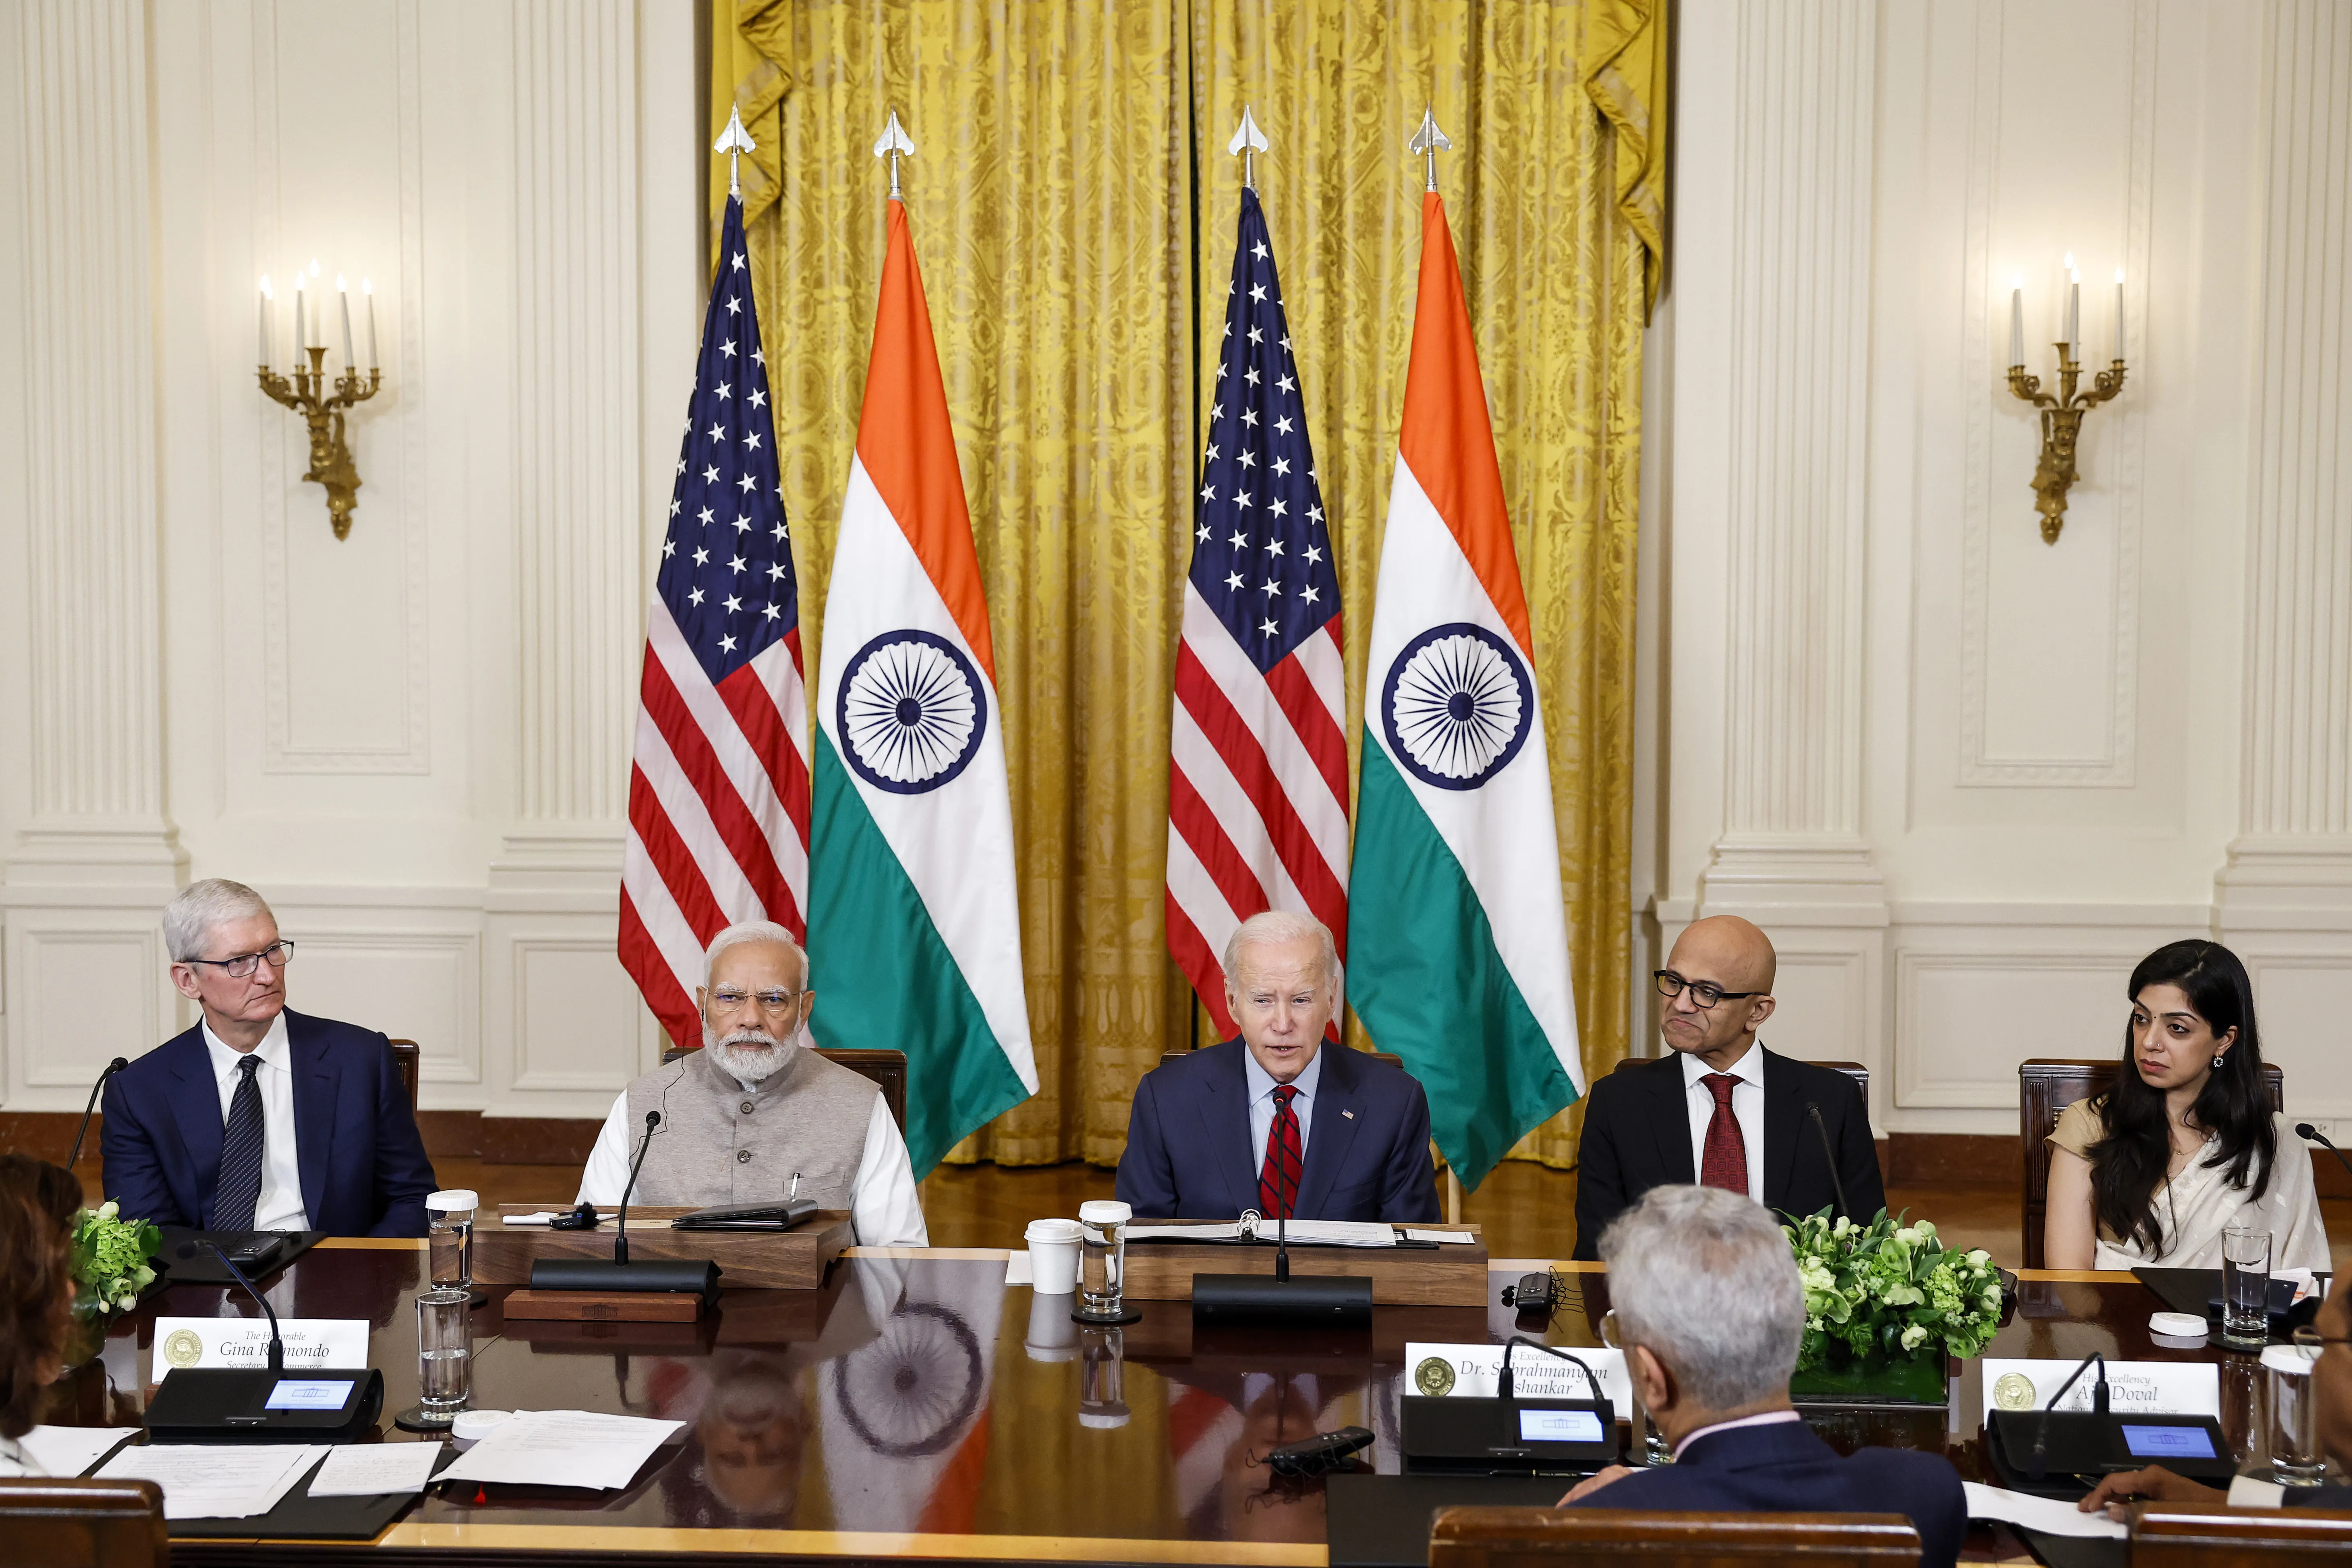 India-US relations: A partnership of trust will inform the ‘techade’ ahead